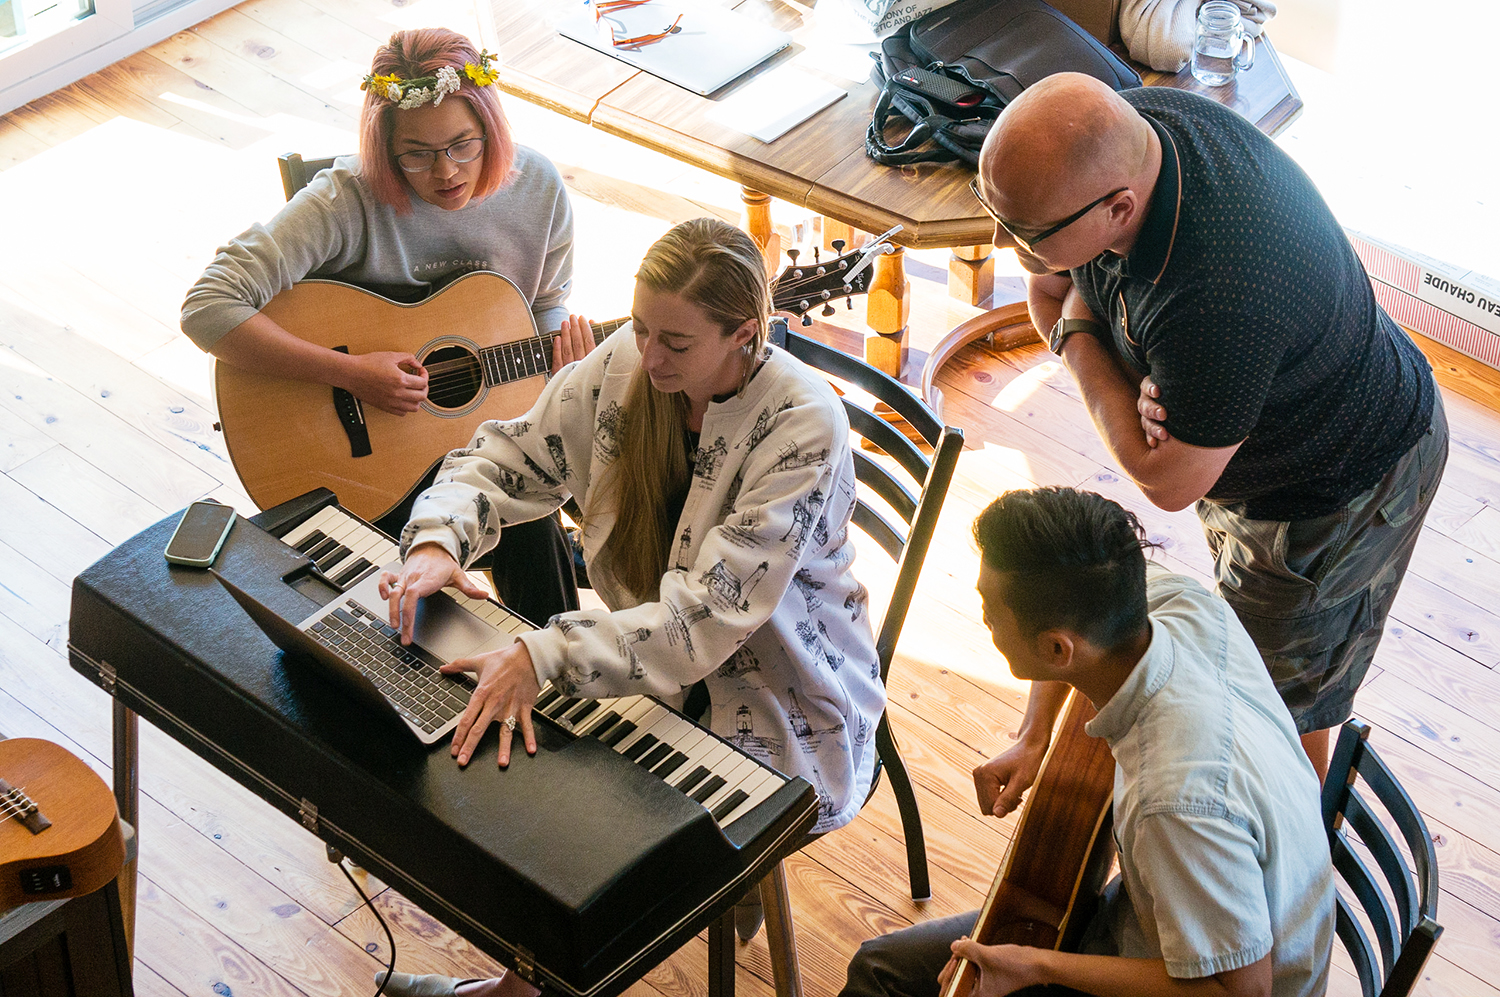 Daniel Whitehead, Valerie Guerra, Niki Jung and Paul Lee huddle together around a keyboard during a day of the retreat. The group of Sanctuary staff joined with songwriters to spend the full five days collaborating and creating the album. Photo courtesy The Porter’s Gate